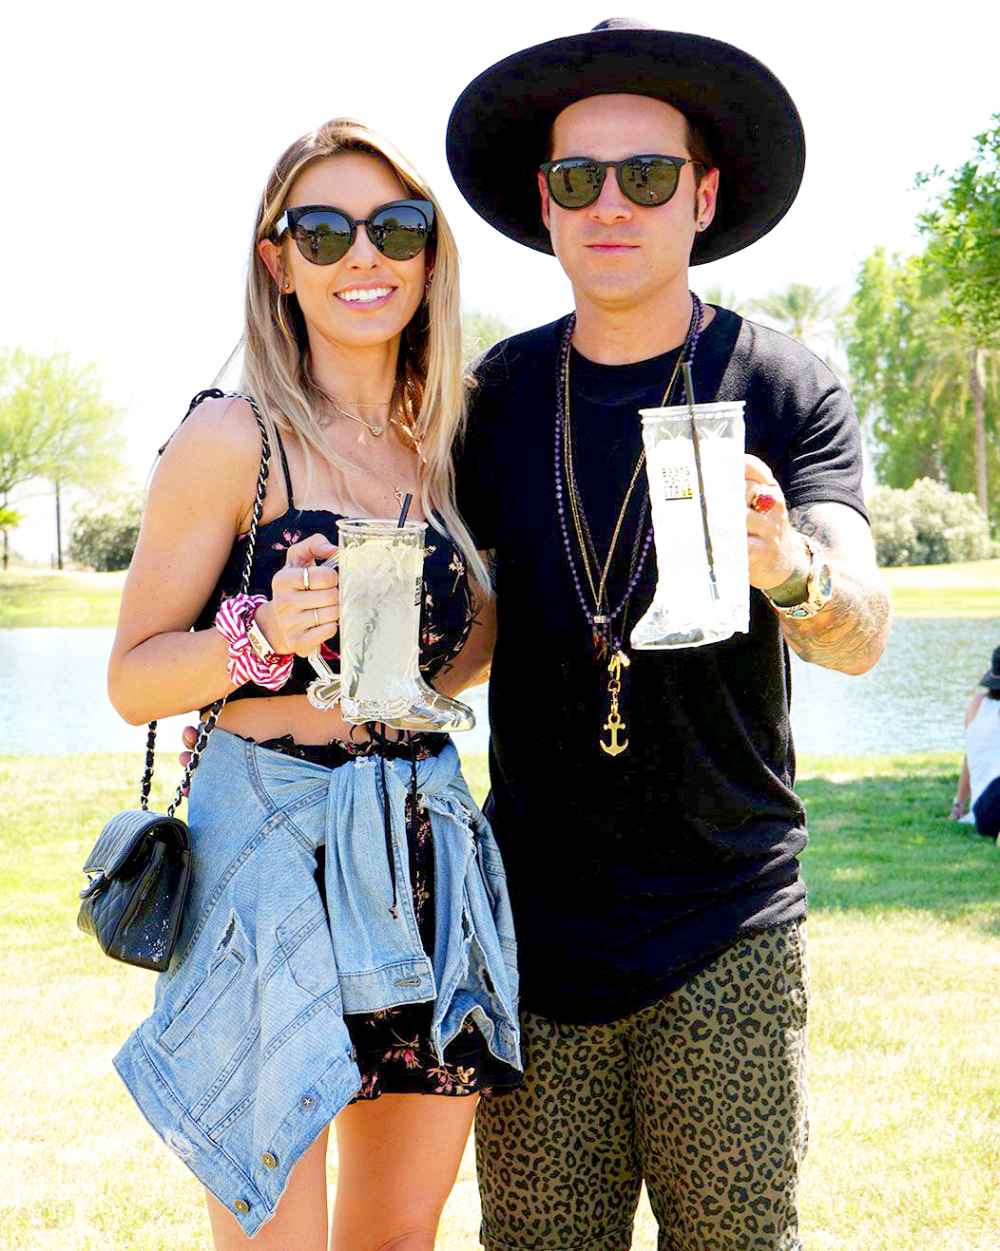 Audrina Patridge and Ryan Cabrera at the 2018 Stagecoach country music festival in Indio, California on April 28, 2018.